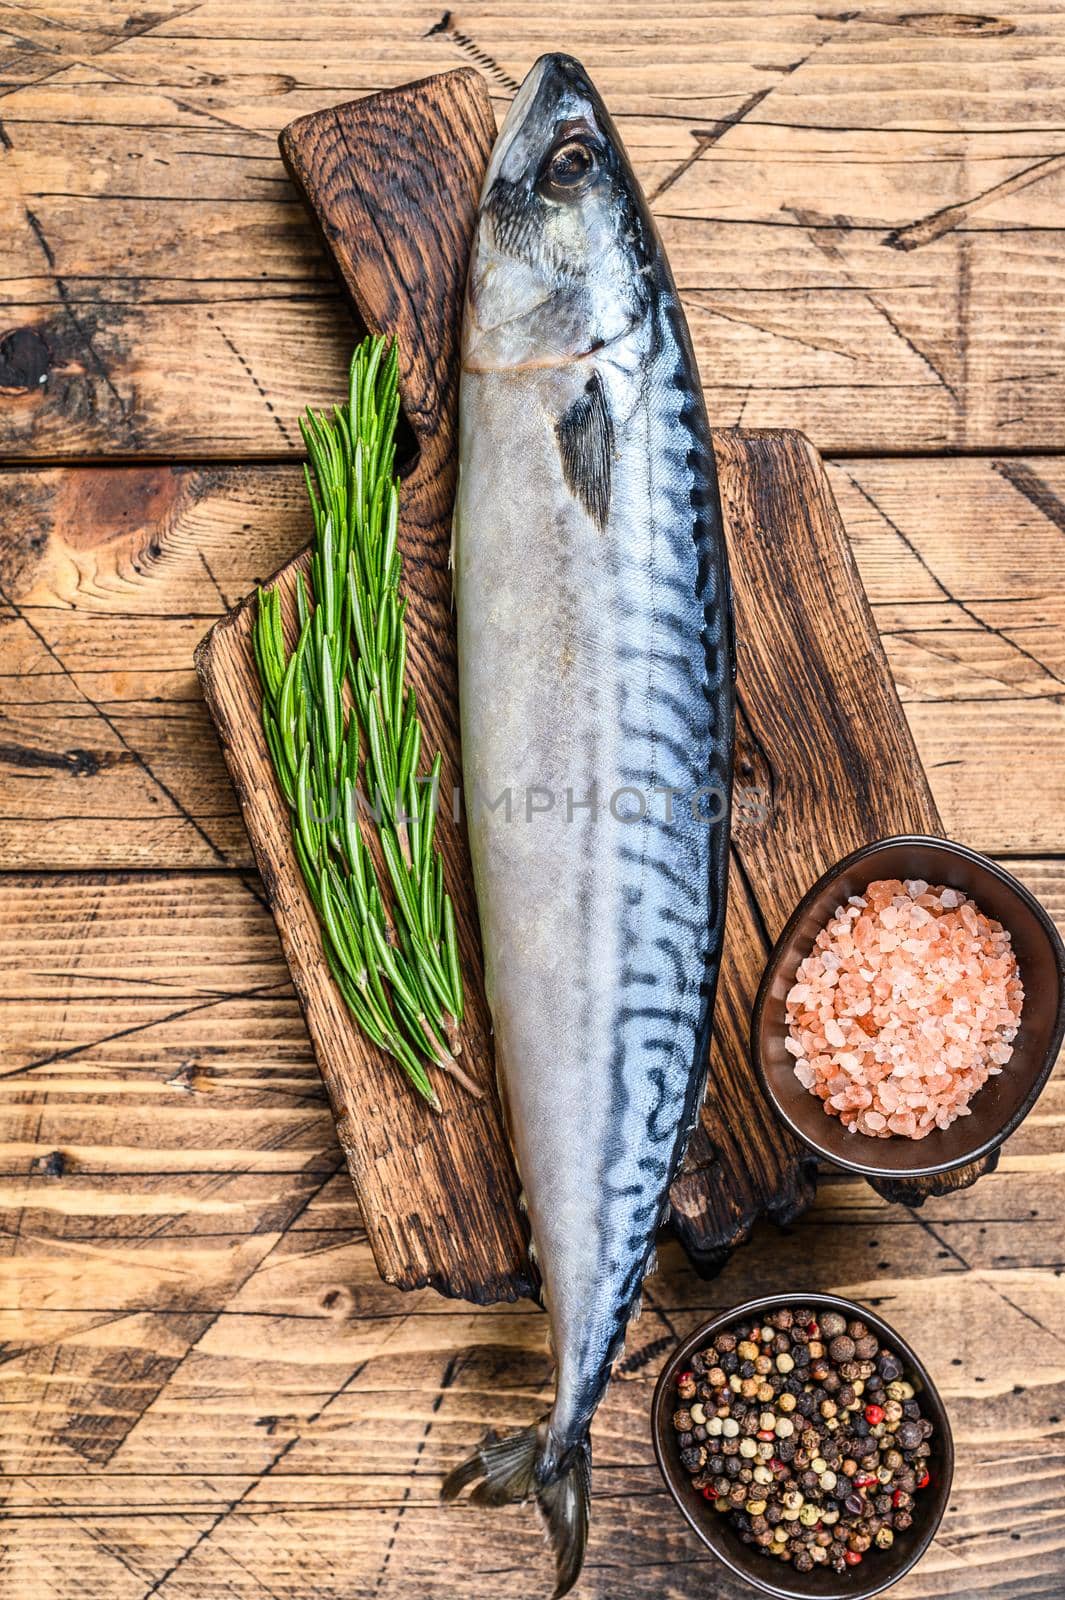 Raw saltwater fish Mackerel on a wooden cutting board with a thyme. wooden background. Top view.